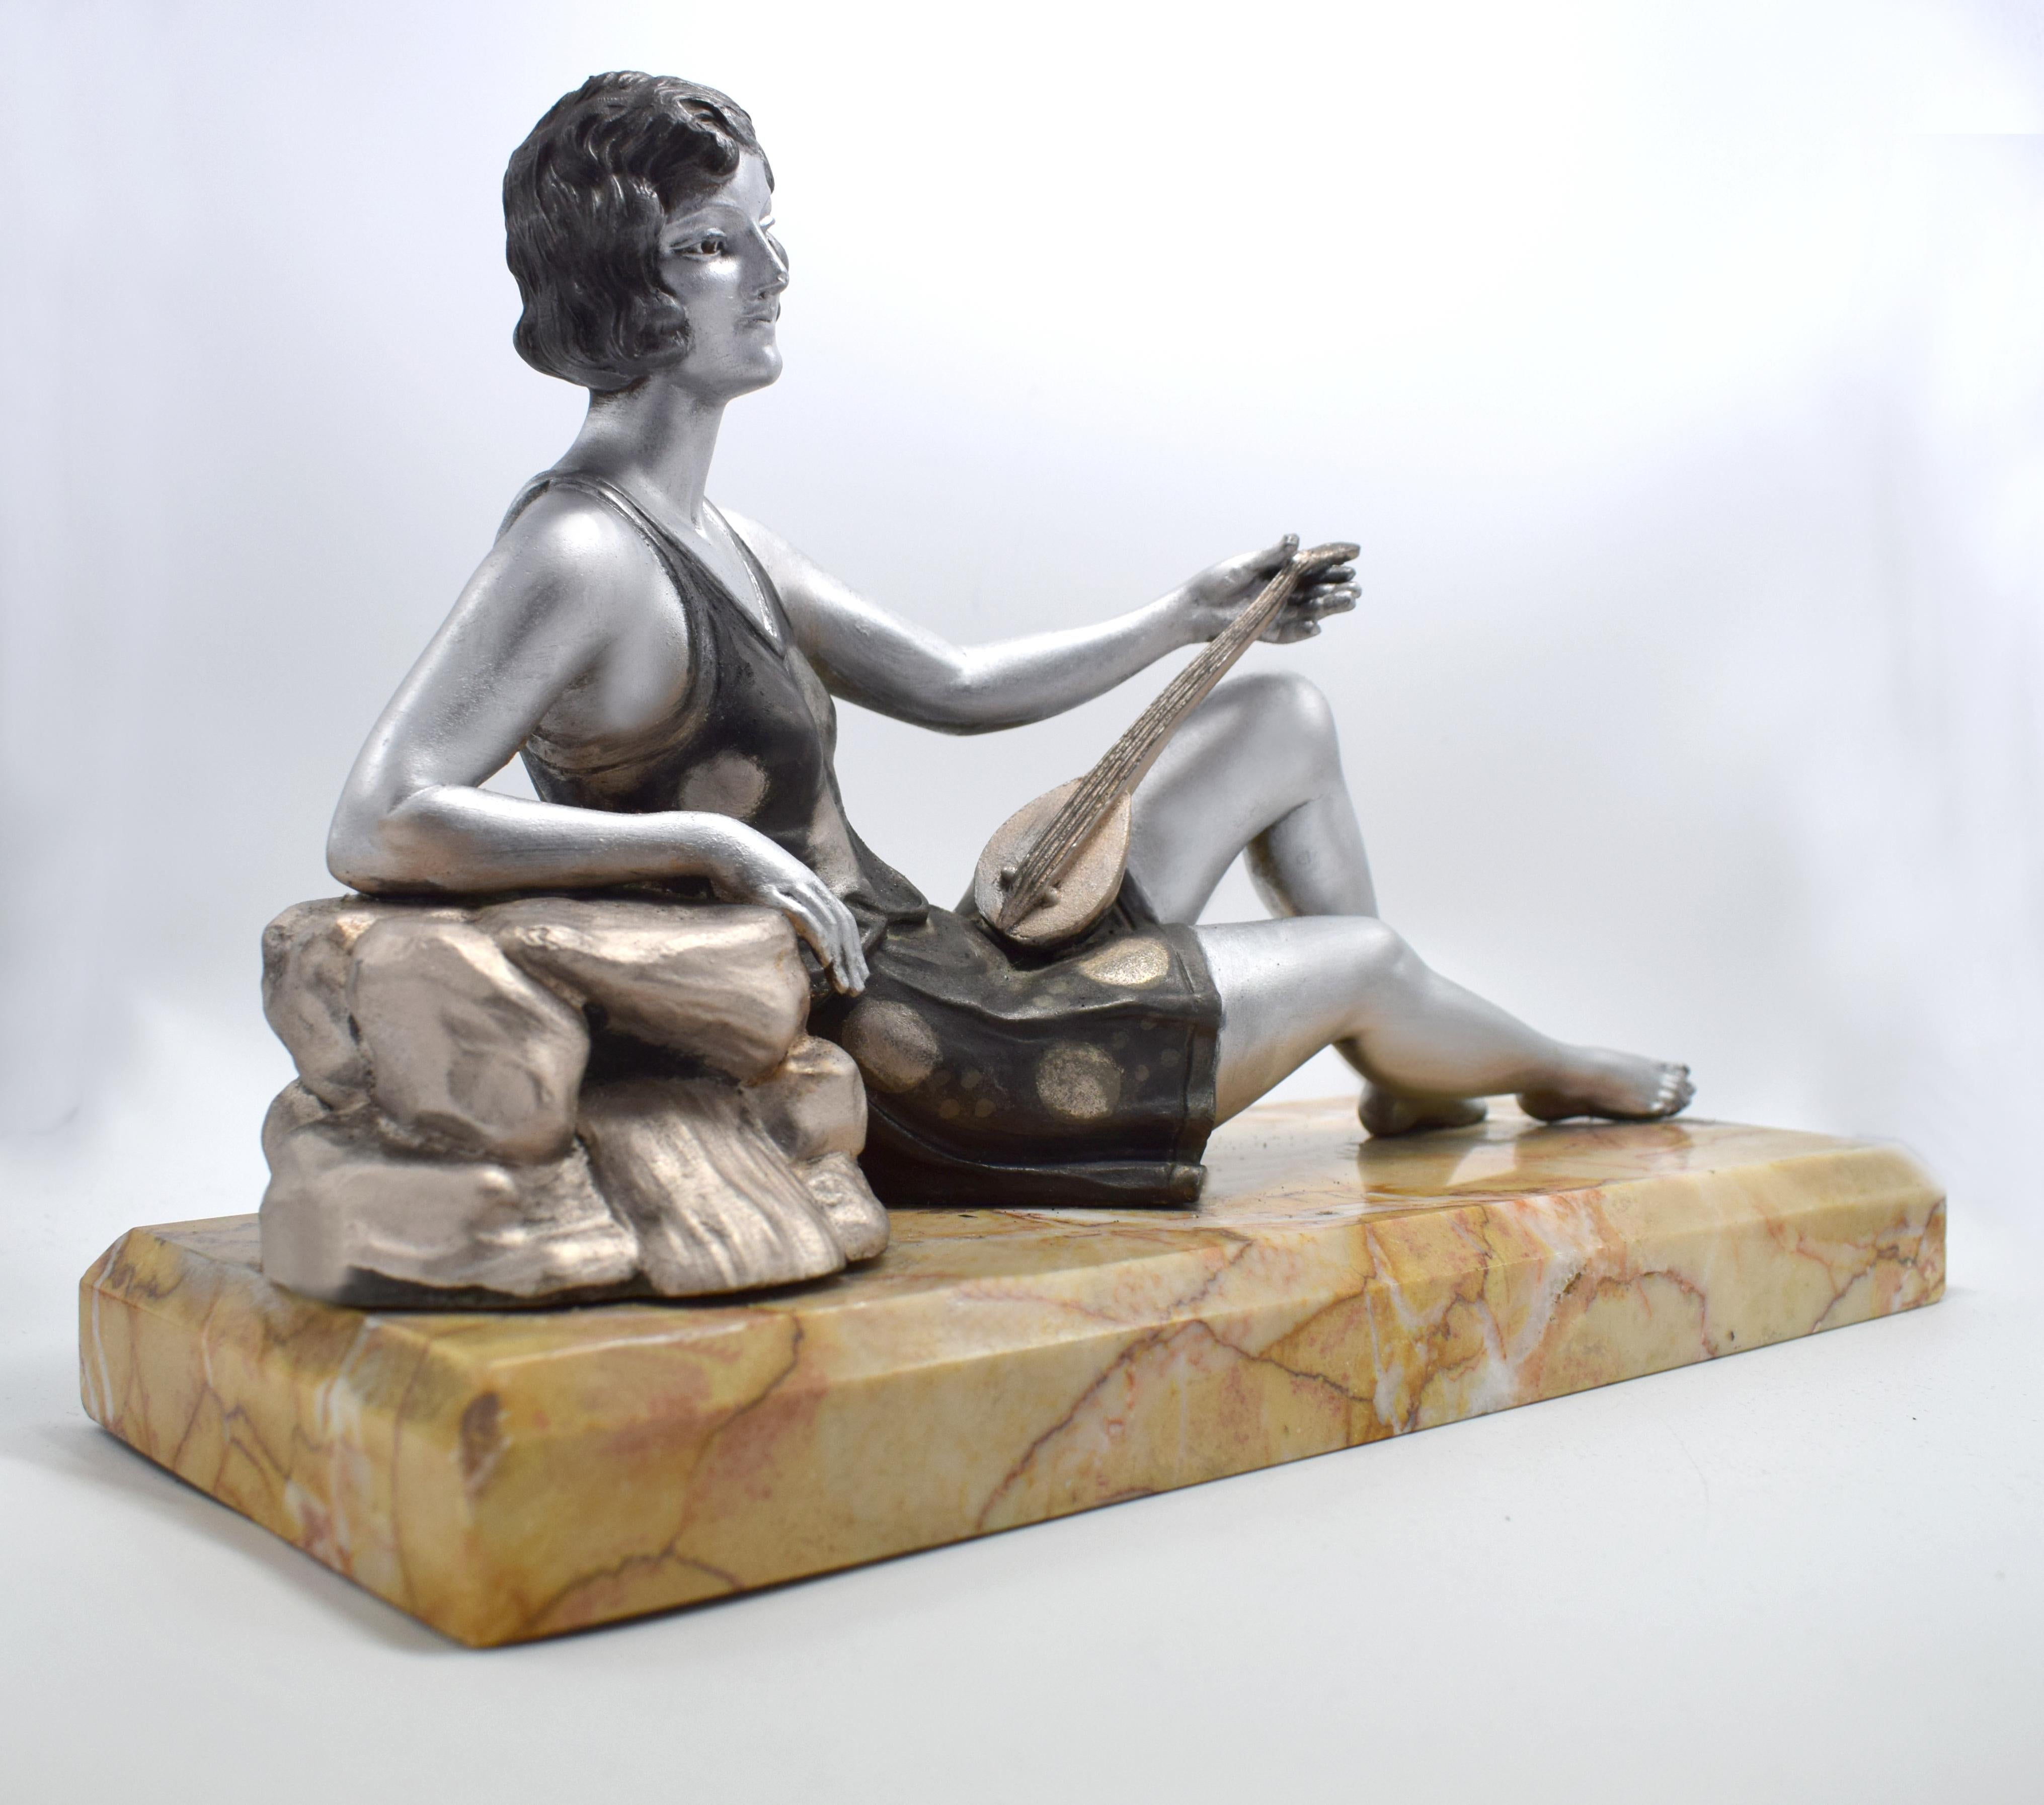 For your consideration is this totally authentic 1930s French spelter female figure reclining on a rock with a lute. The base metal is spelter also known as white metal and cold painted on top. Lovely detailing, styled in the fashion of the day with